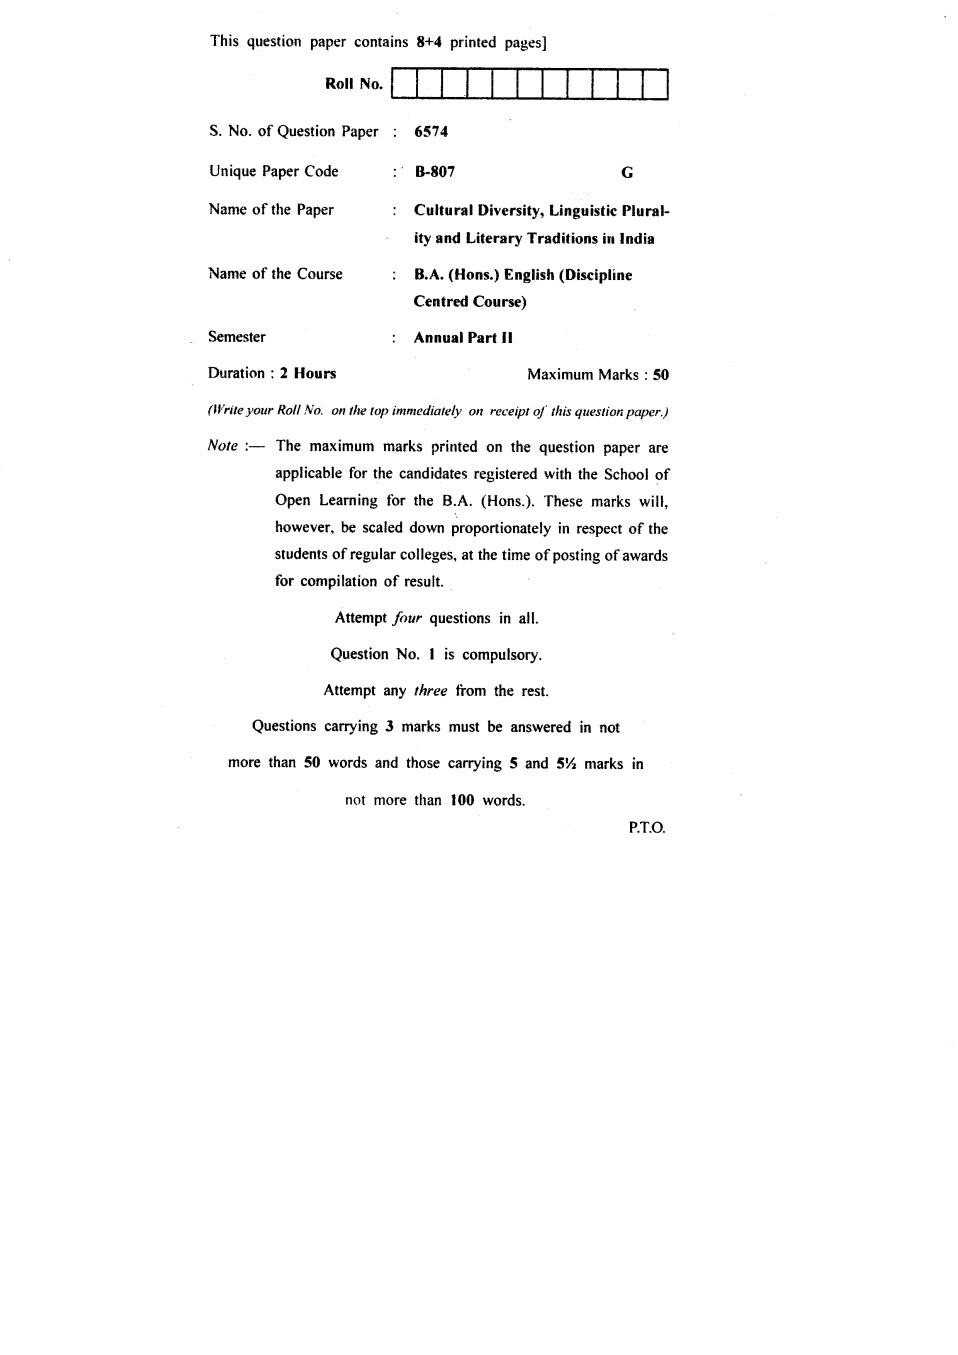 DU SOL Question Paper 2018 BA (Hons.) English - Cultural Diversity, Linguistic Plurality and Literacy Traditions in India - Page 1